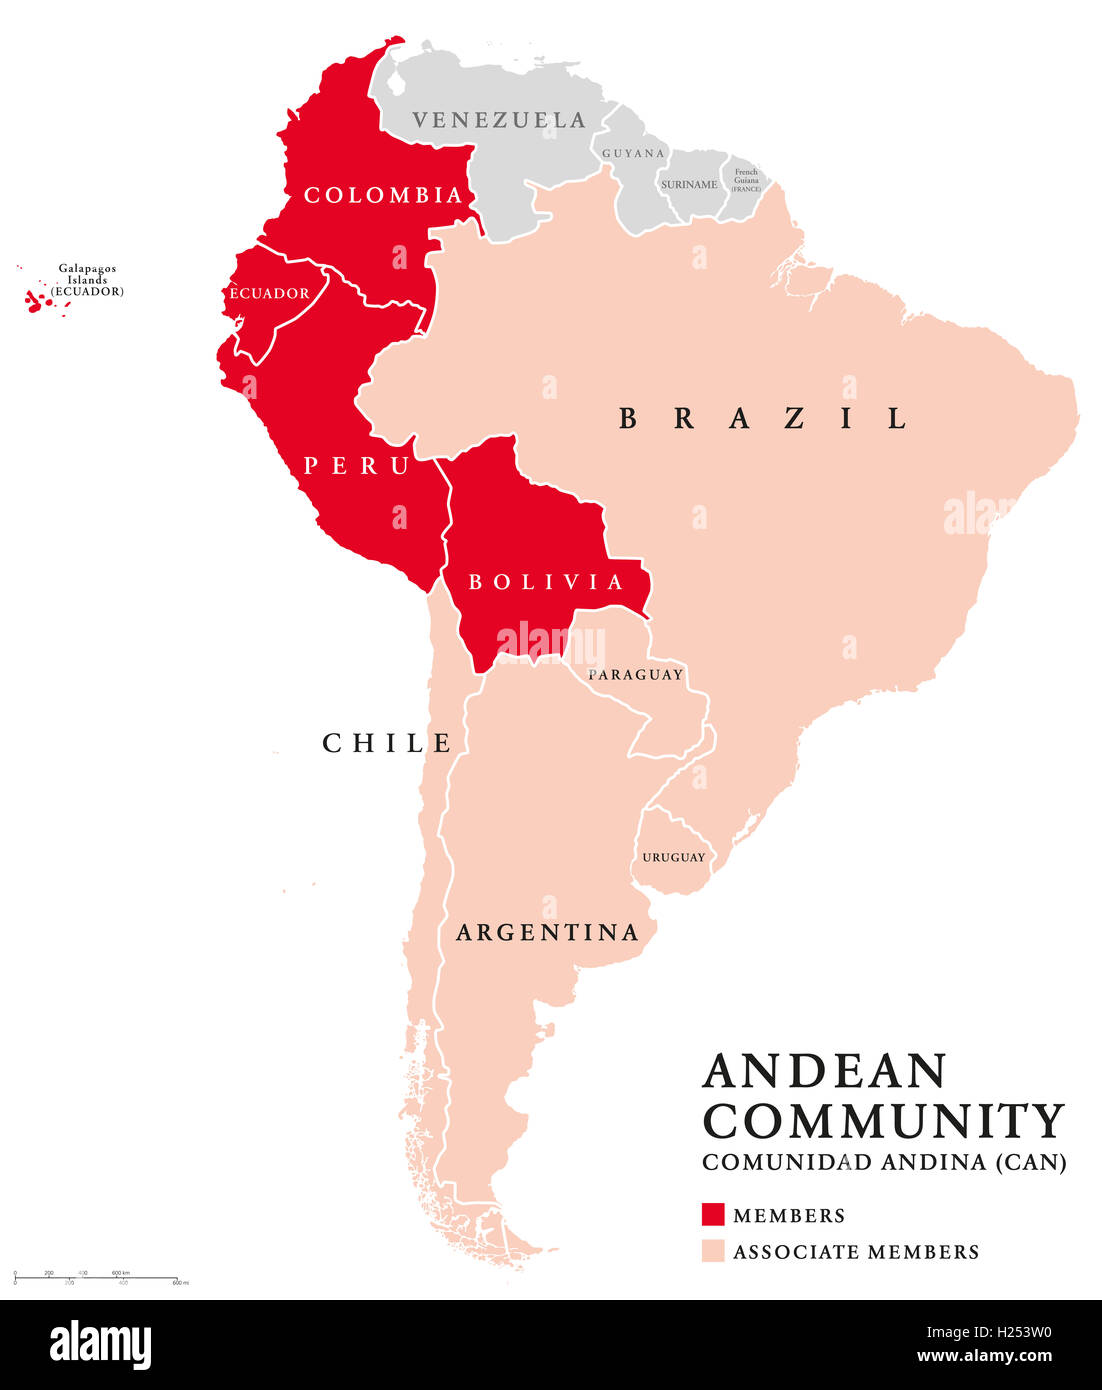 Andean Community Countries Map A Trade Bloc Comunidad Andina Can H253W0 